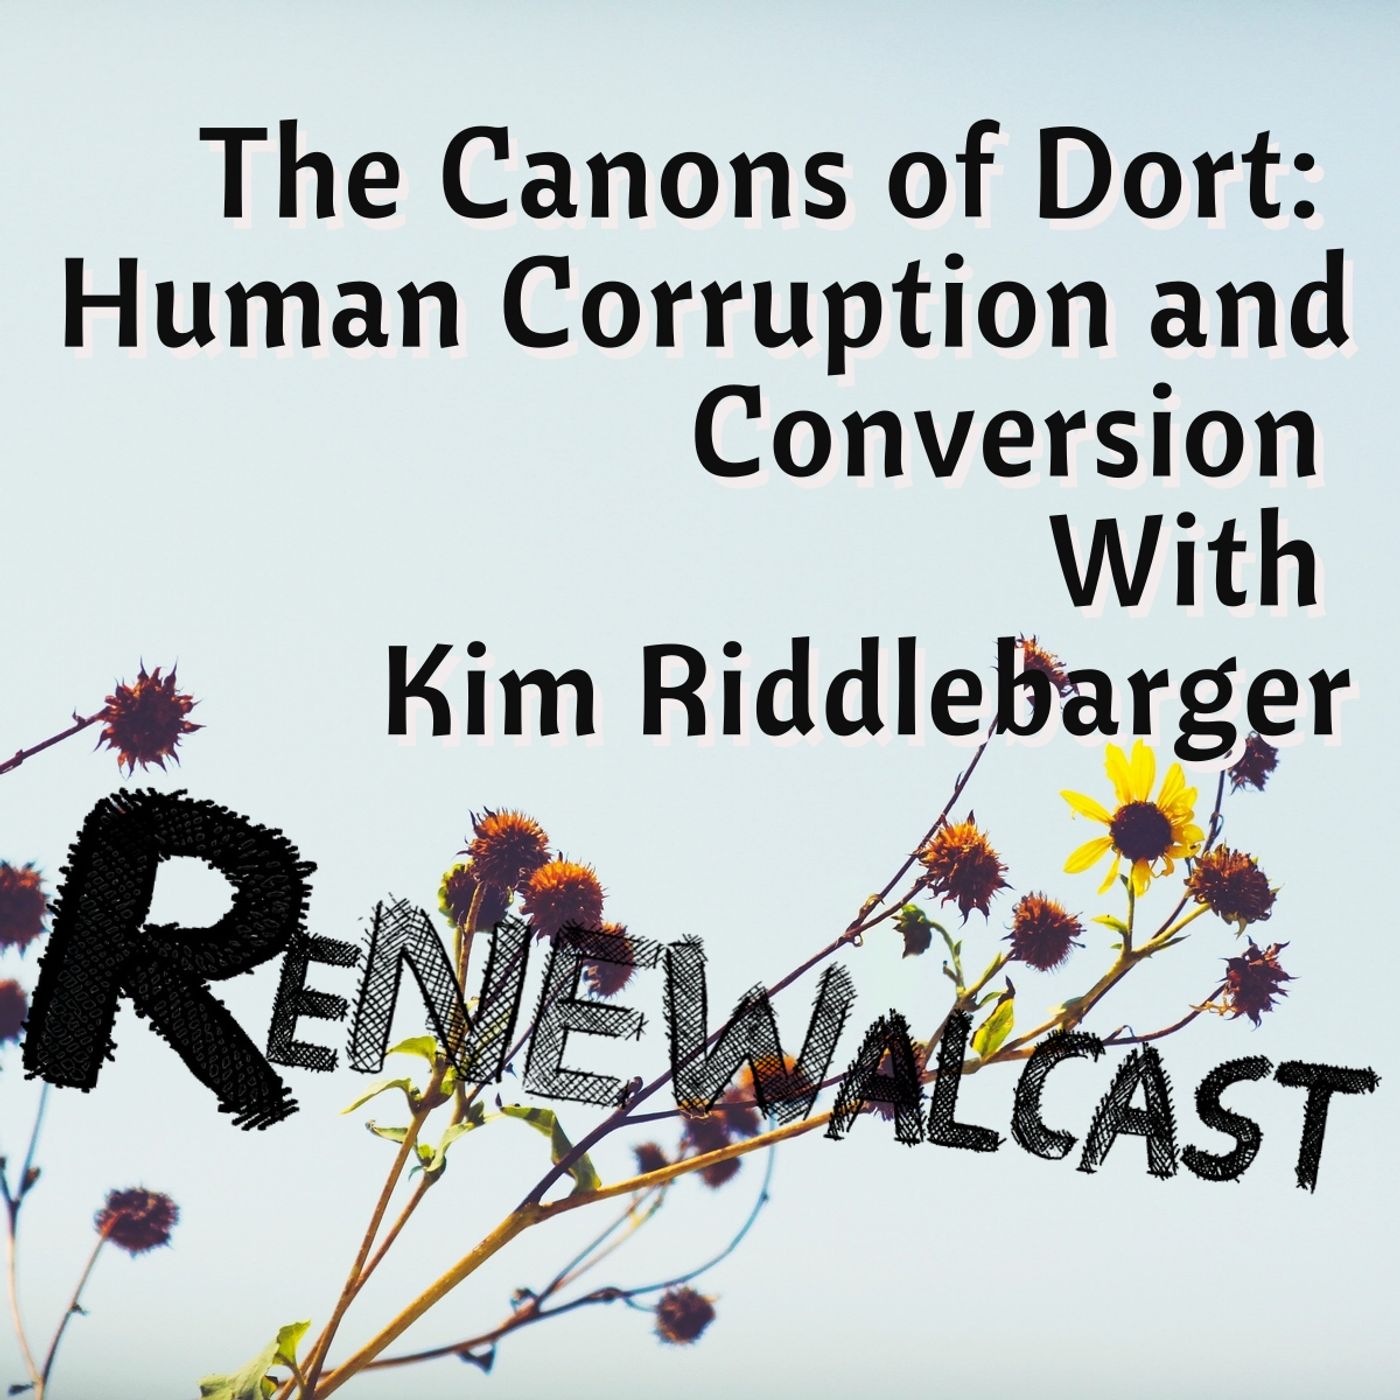 The Canons of Dort:  Human Corruption and Conversion With  Kim Riddlebarger